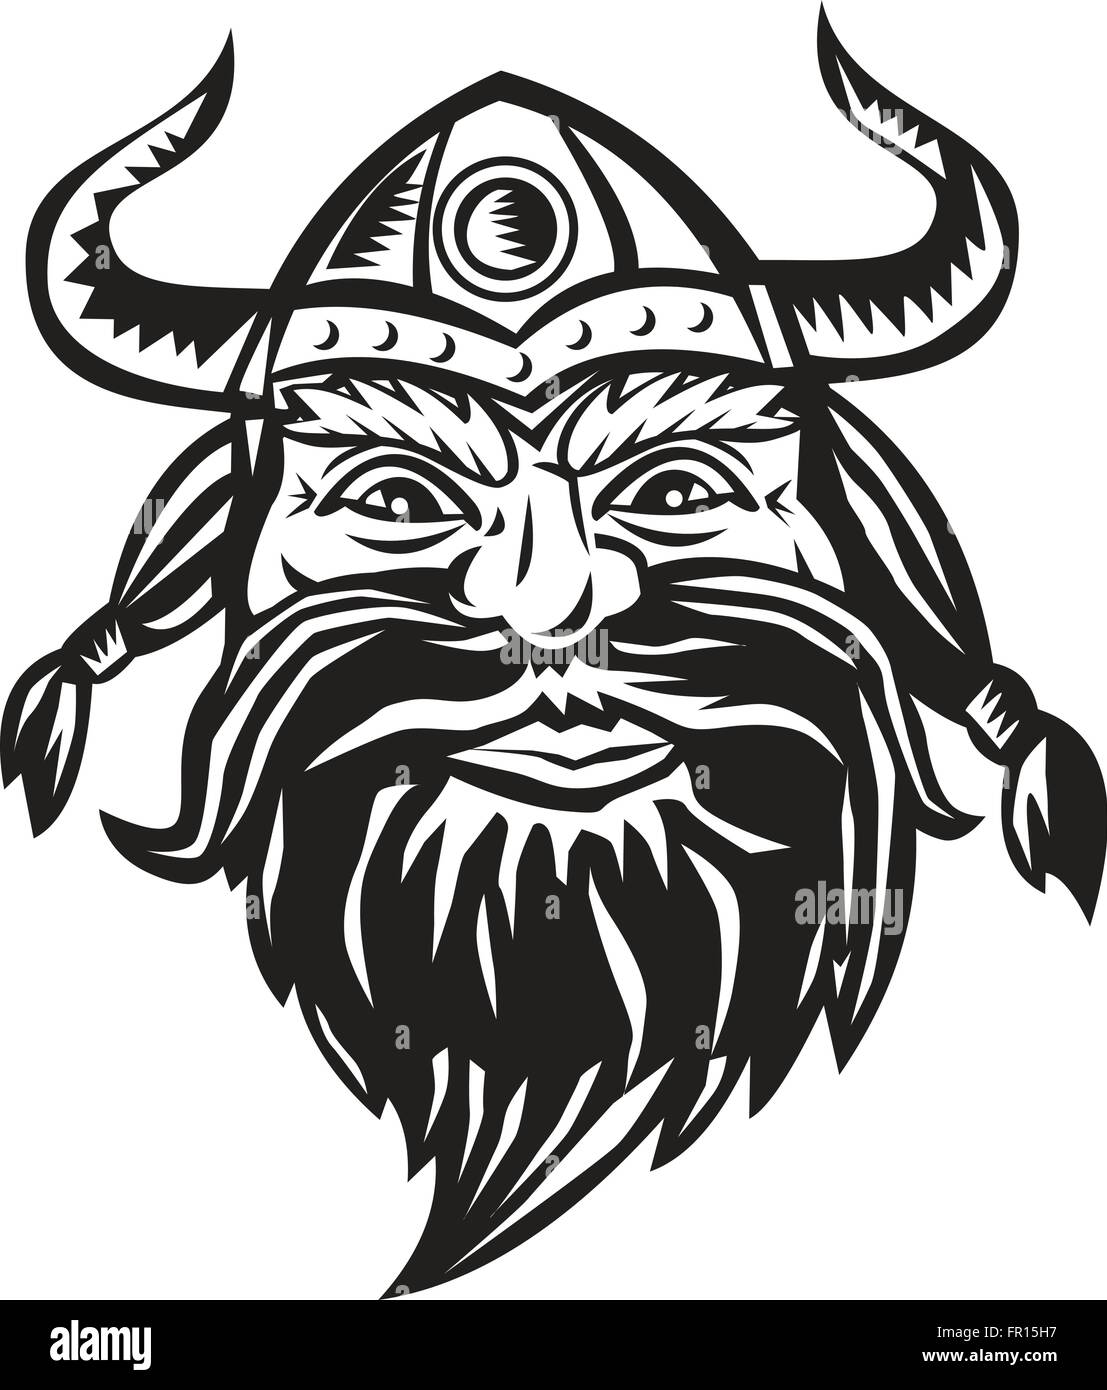 Black and white illustration of a head of a norseman viking warrior raider barbarian wearing horned helmet with beard viewed from the front set on isolated white background. Stock Vector